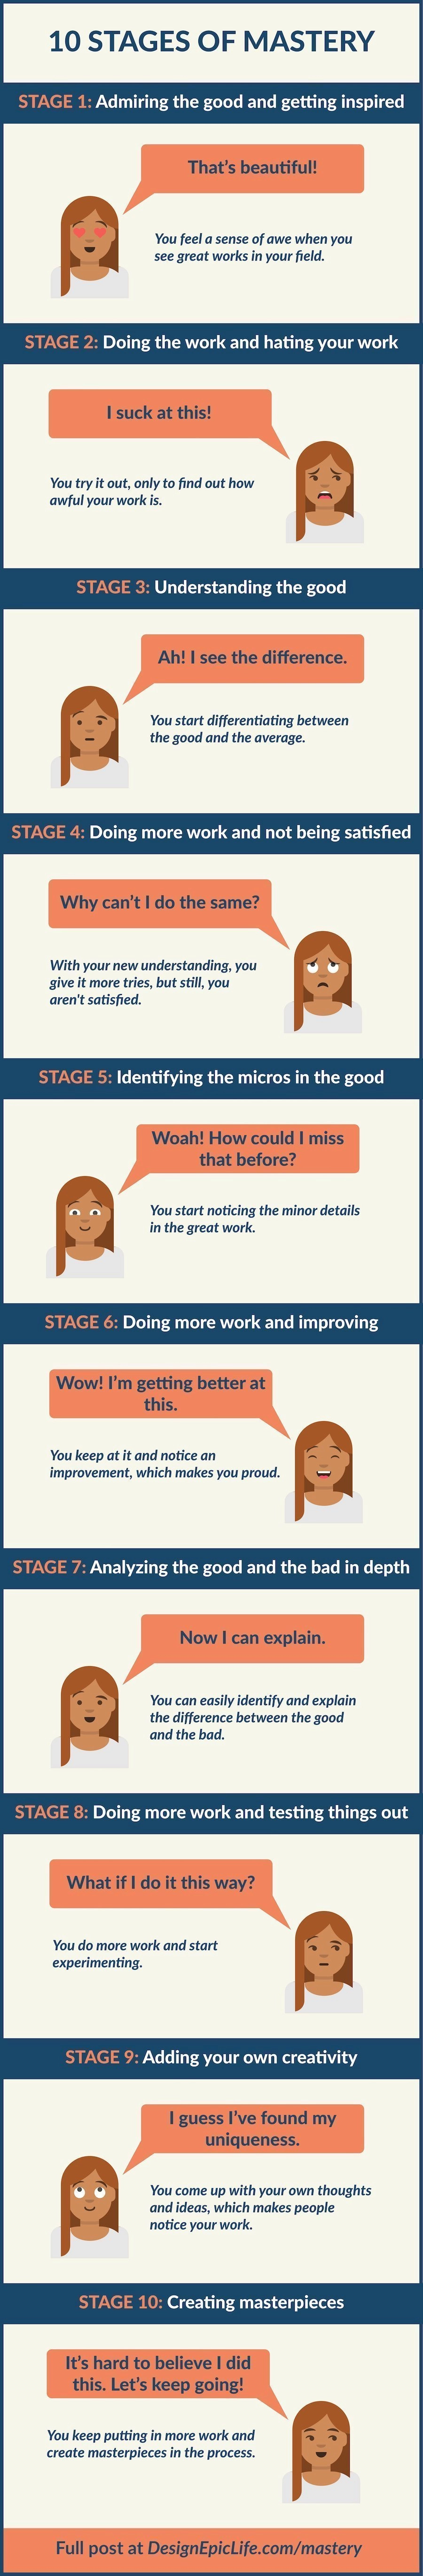 10 Stages of Mastery